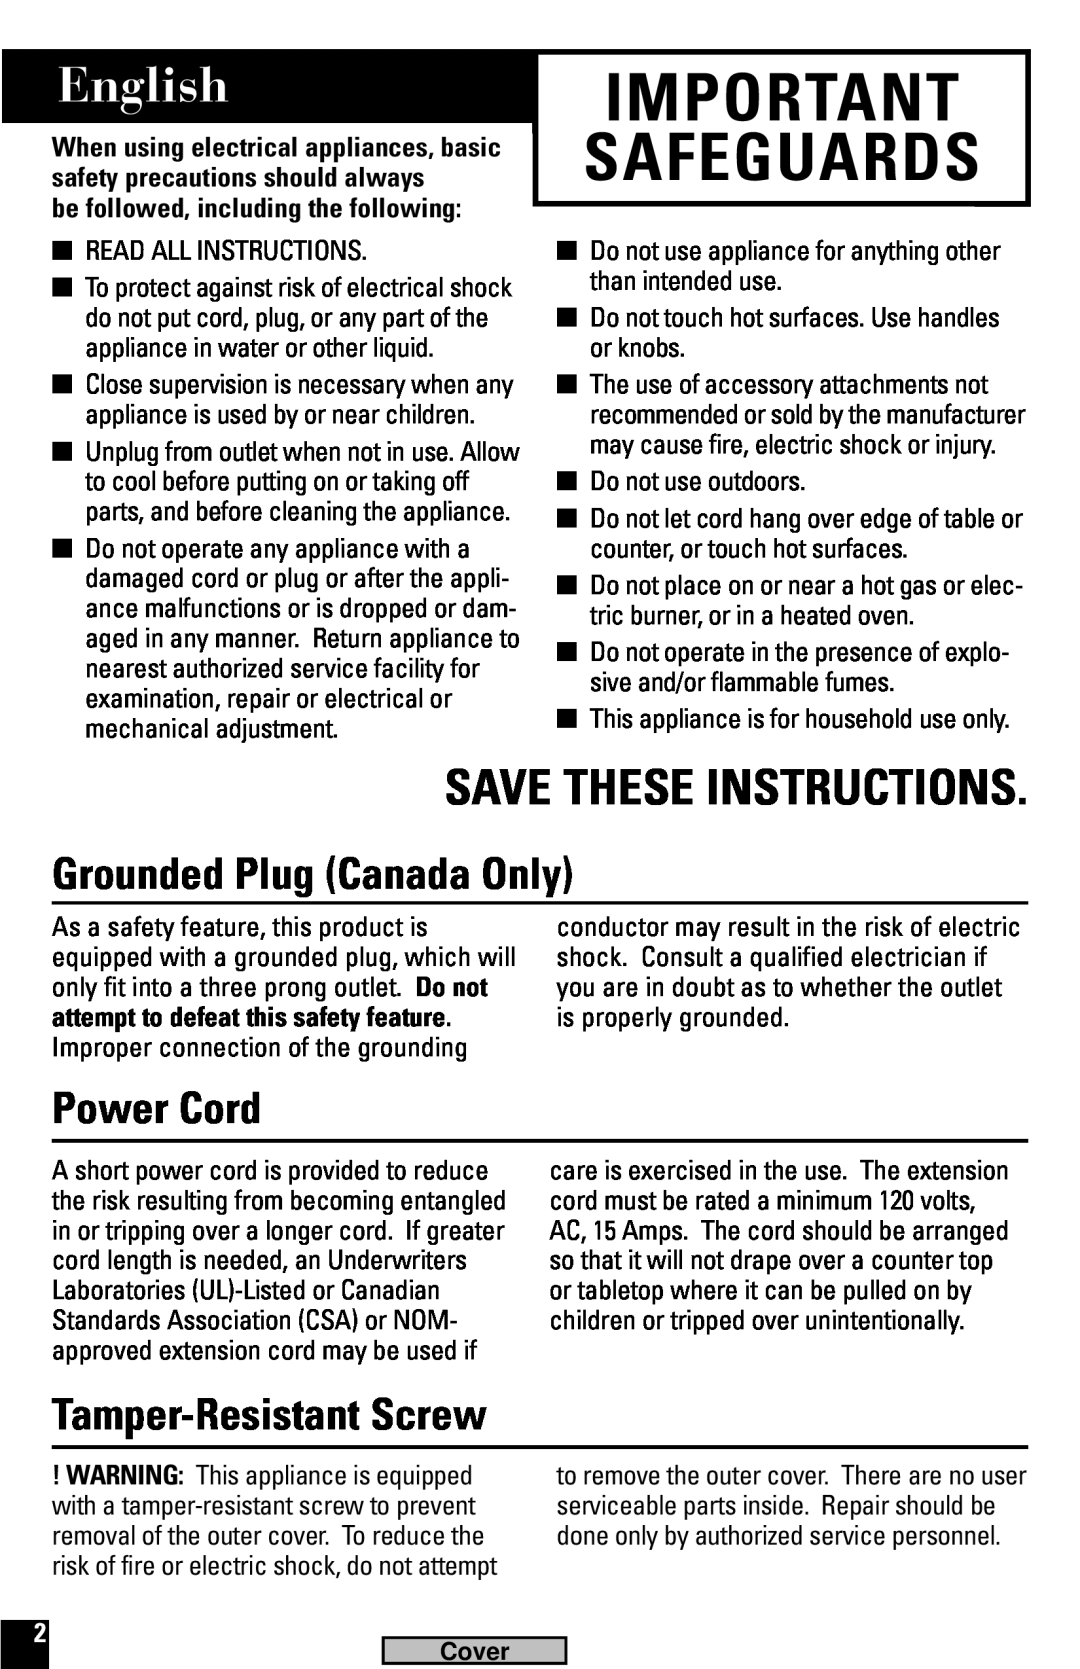 Black & Decker G600, G100 English, Save These Instructions, Grounded Plug Canada Only, Power Cord, Tamper-ResistantScrew 